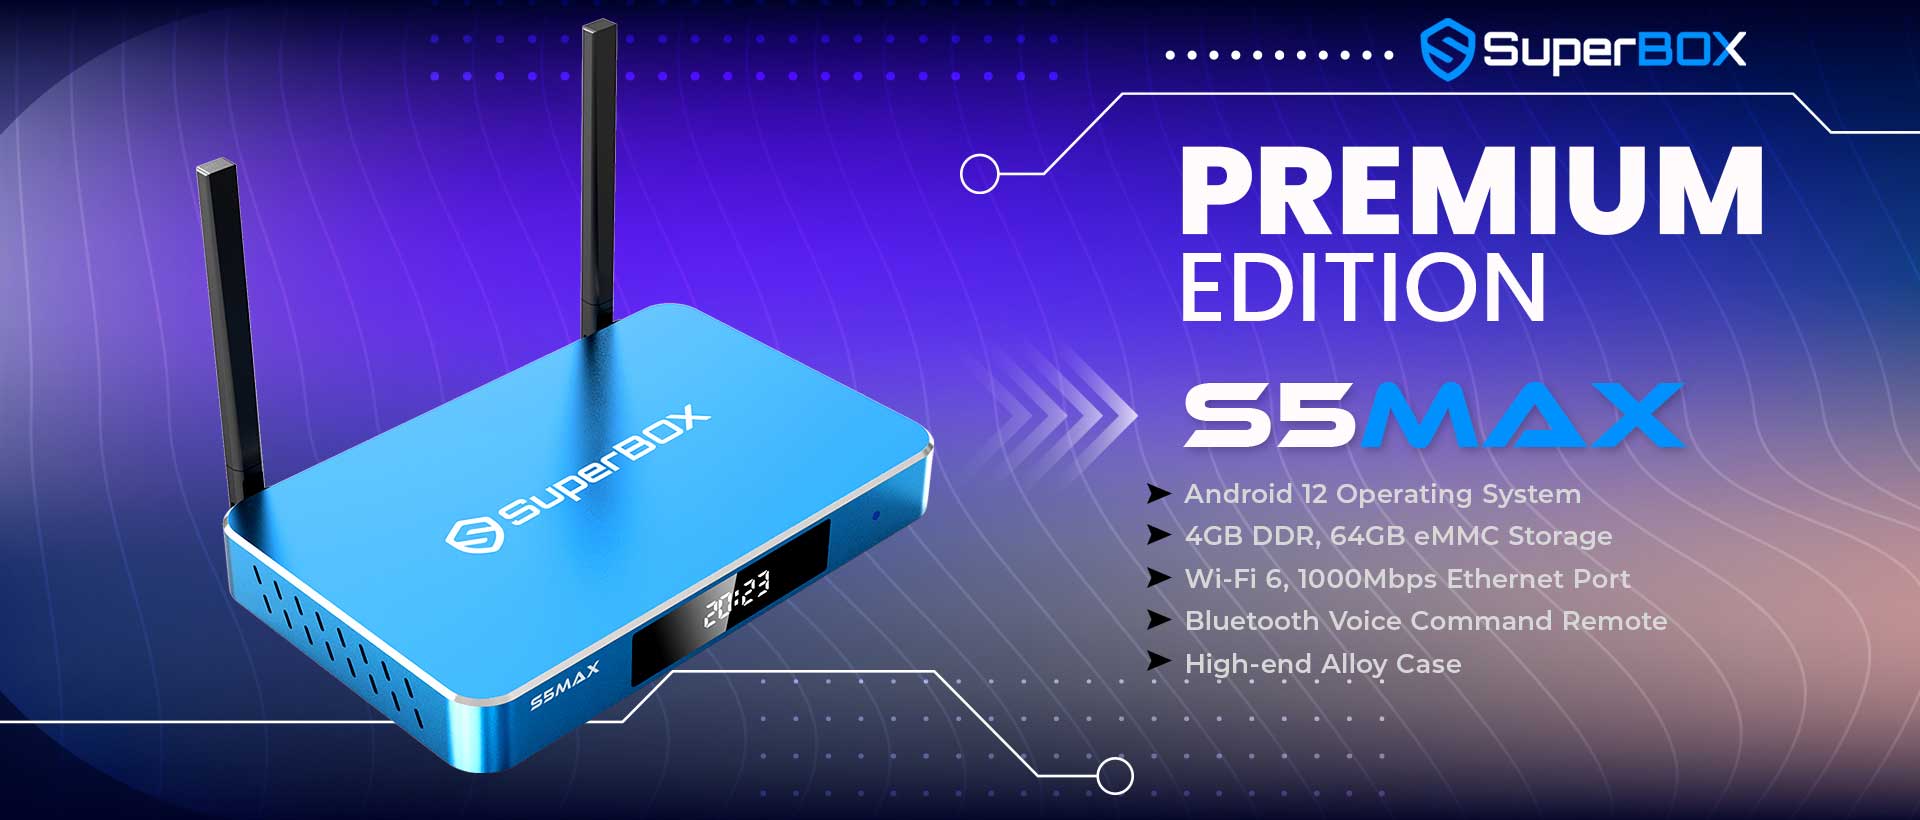 SuperBox S5 MAX equipped with advanced voice command functionality